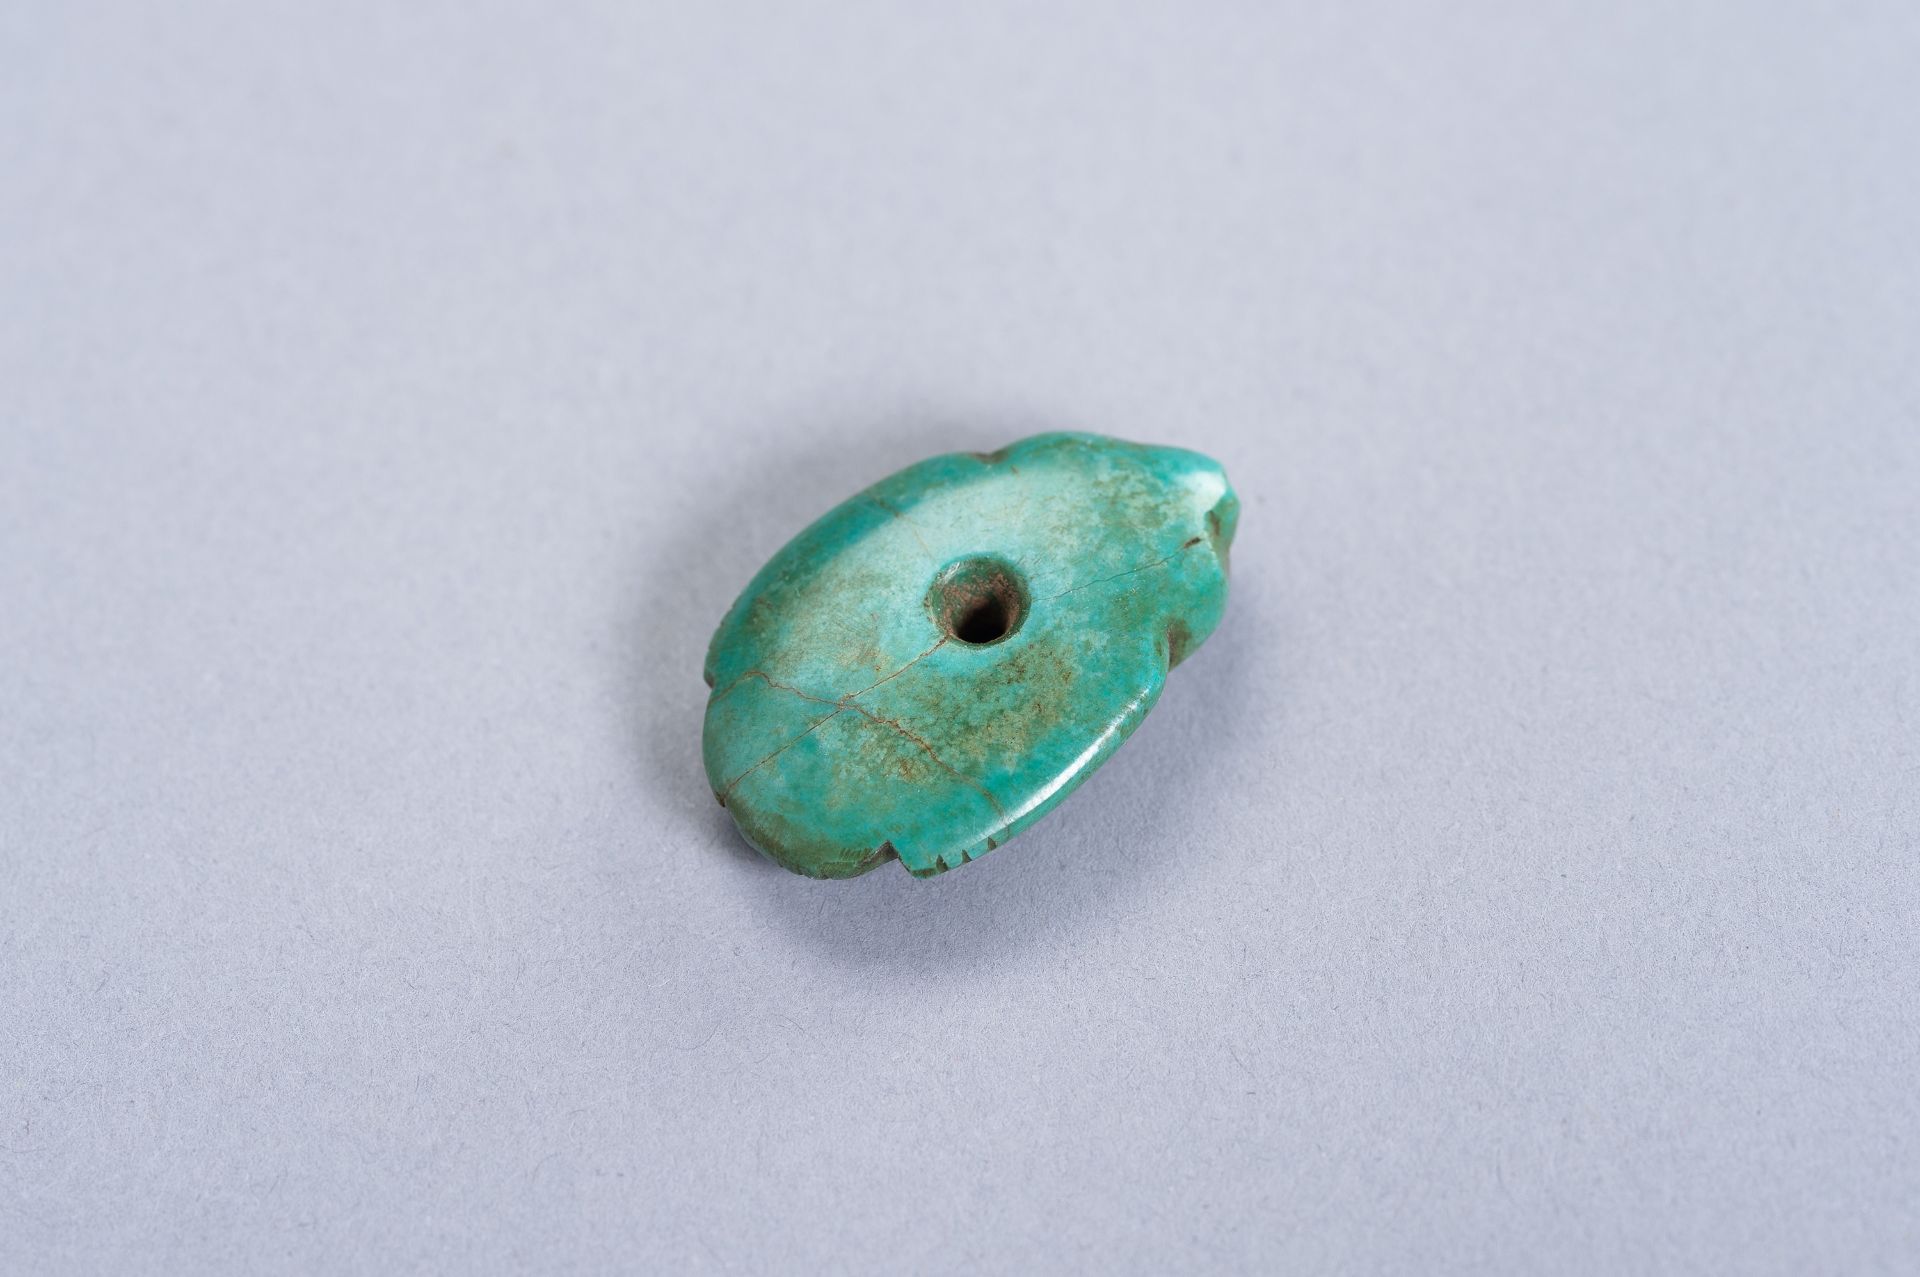 A TURQUOISE PENDANT OF A BIRD - Image 6 of 7